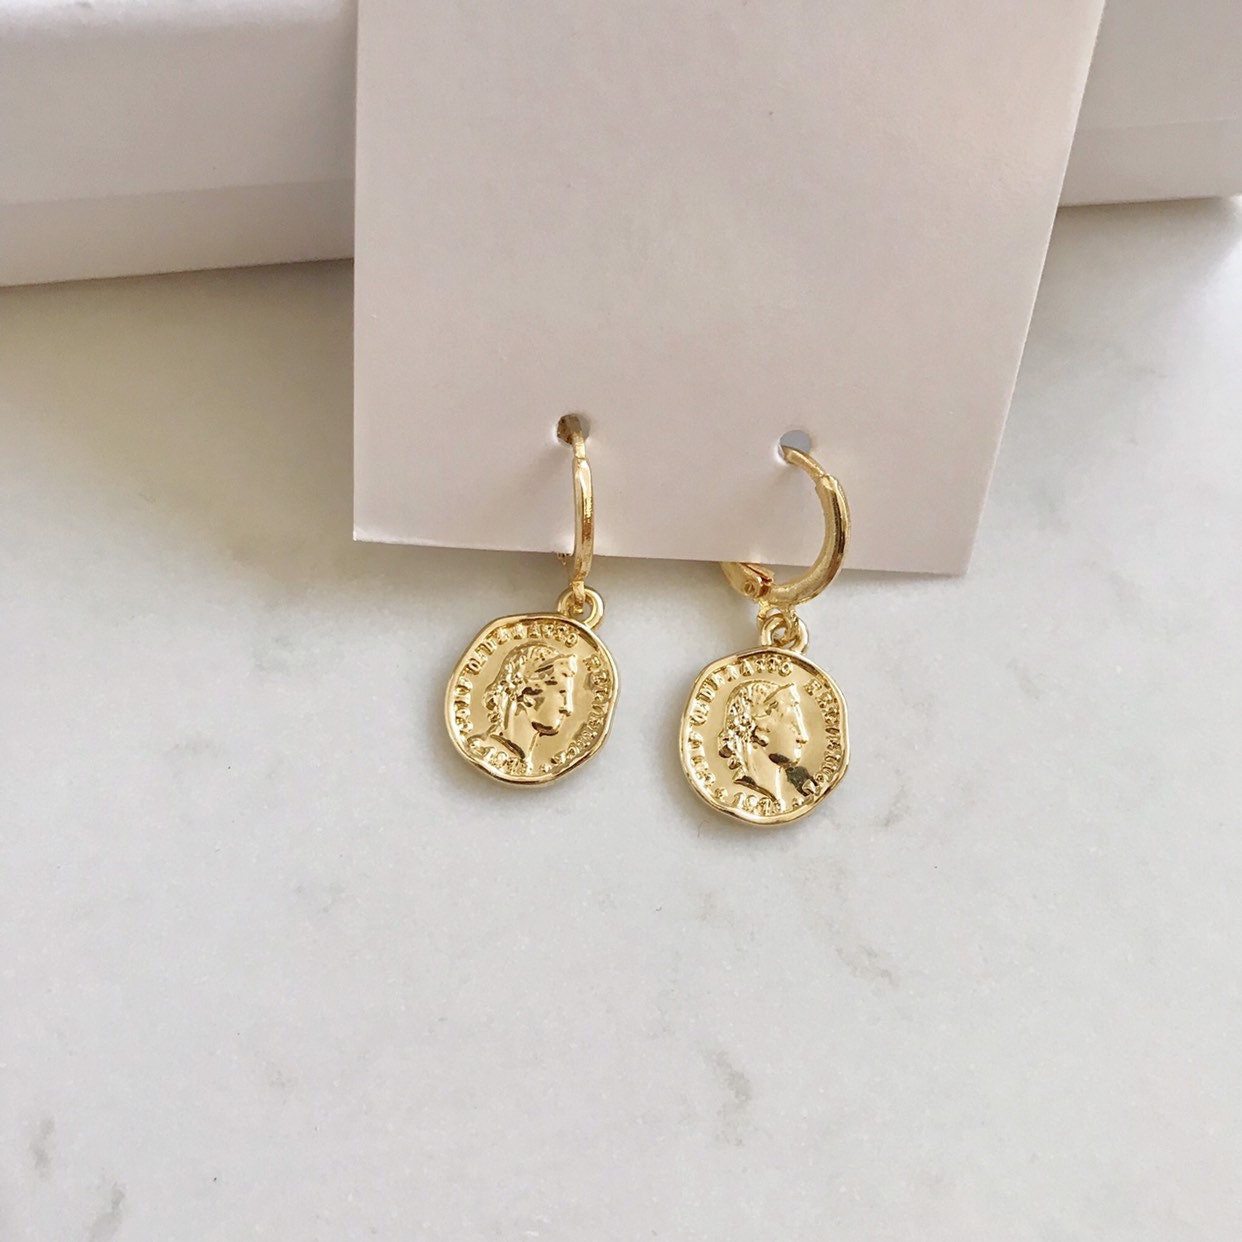 Buy wholesale Gold Coin Filigree Earrings with Diamante